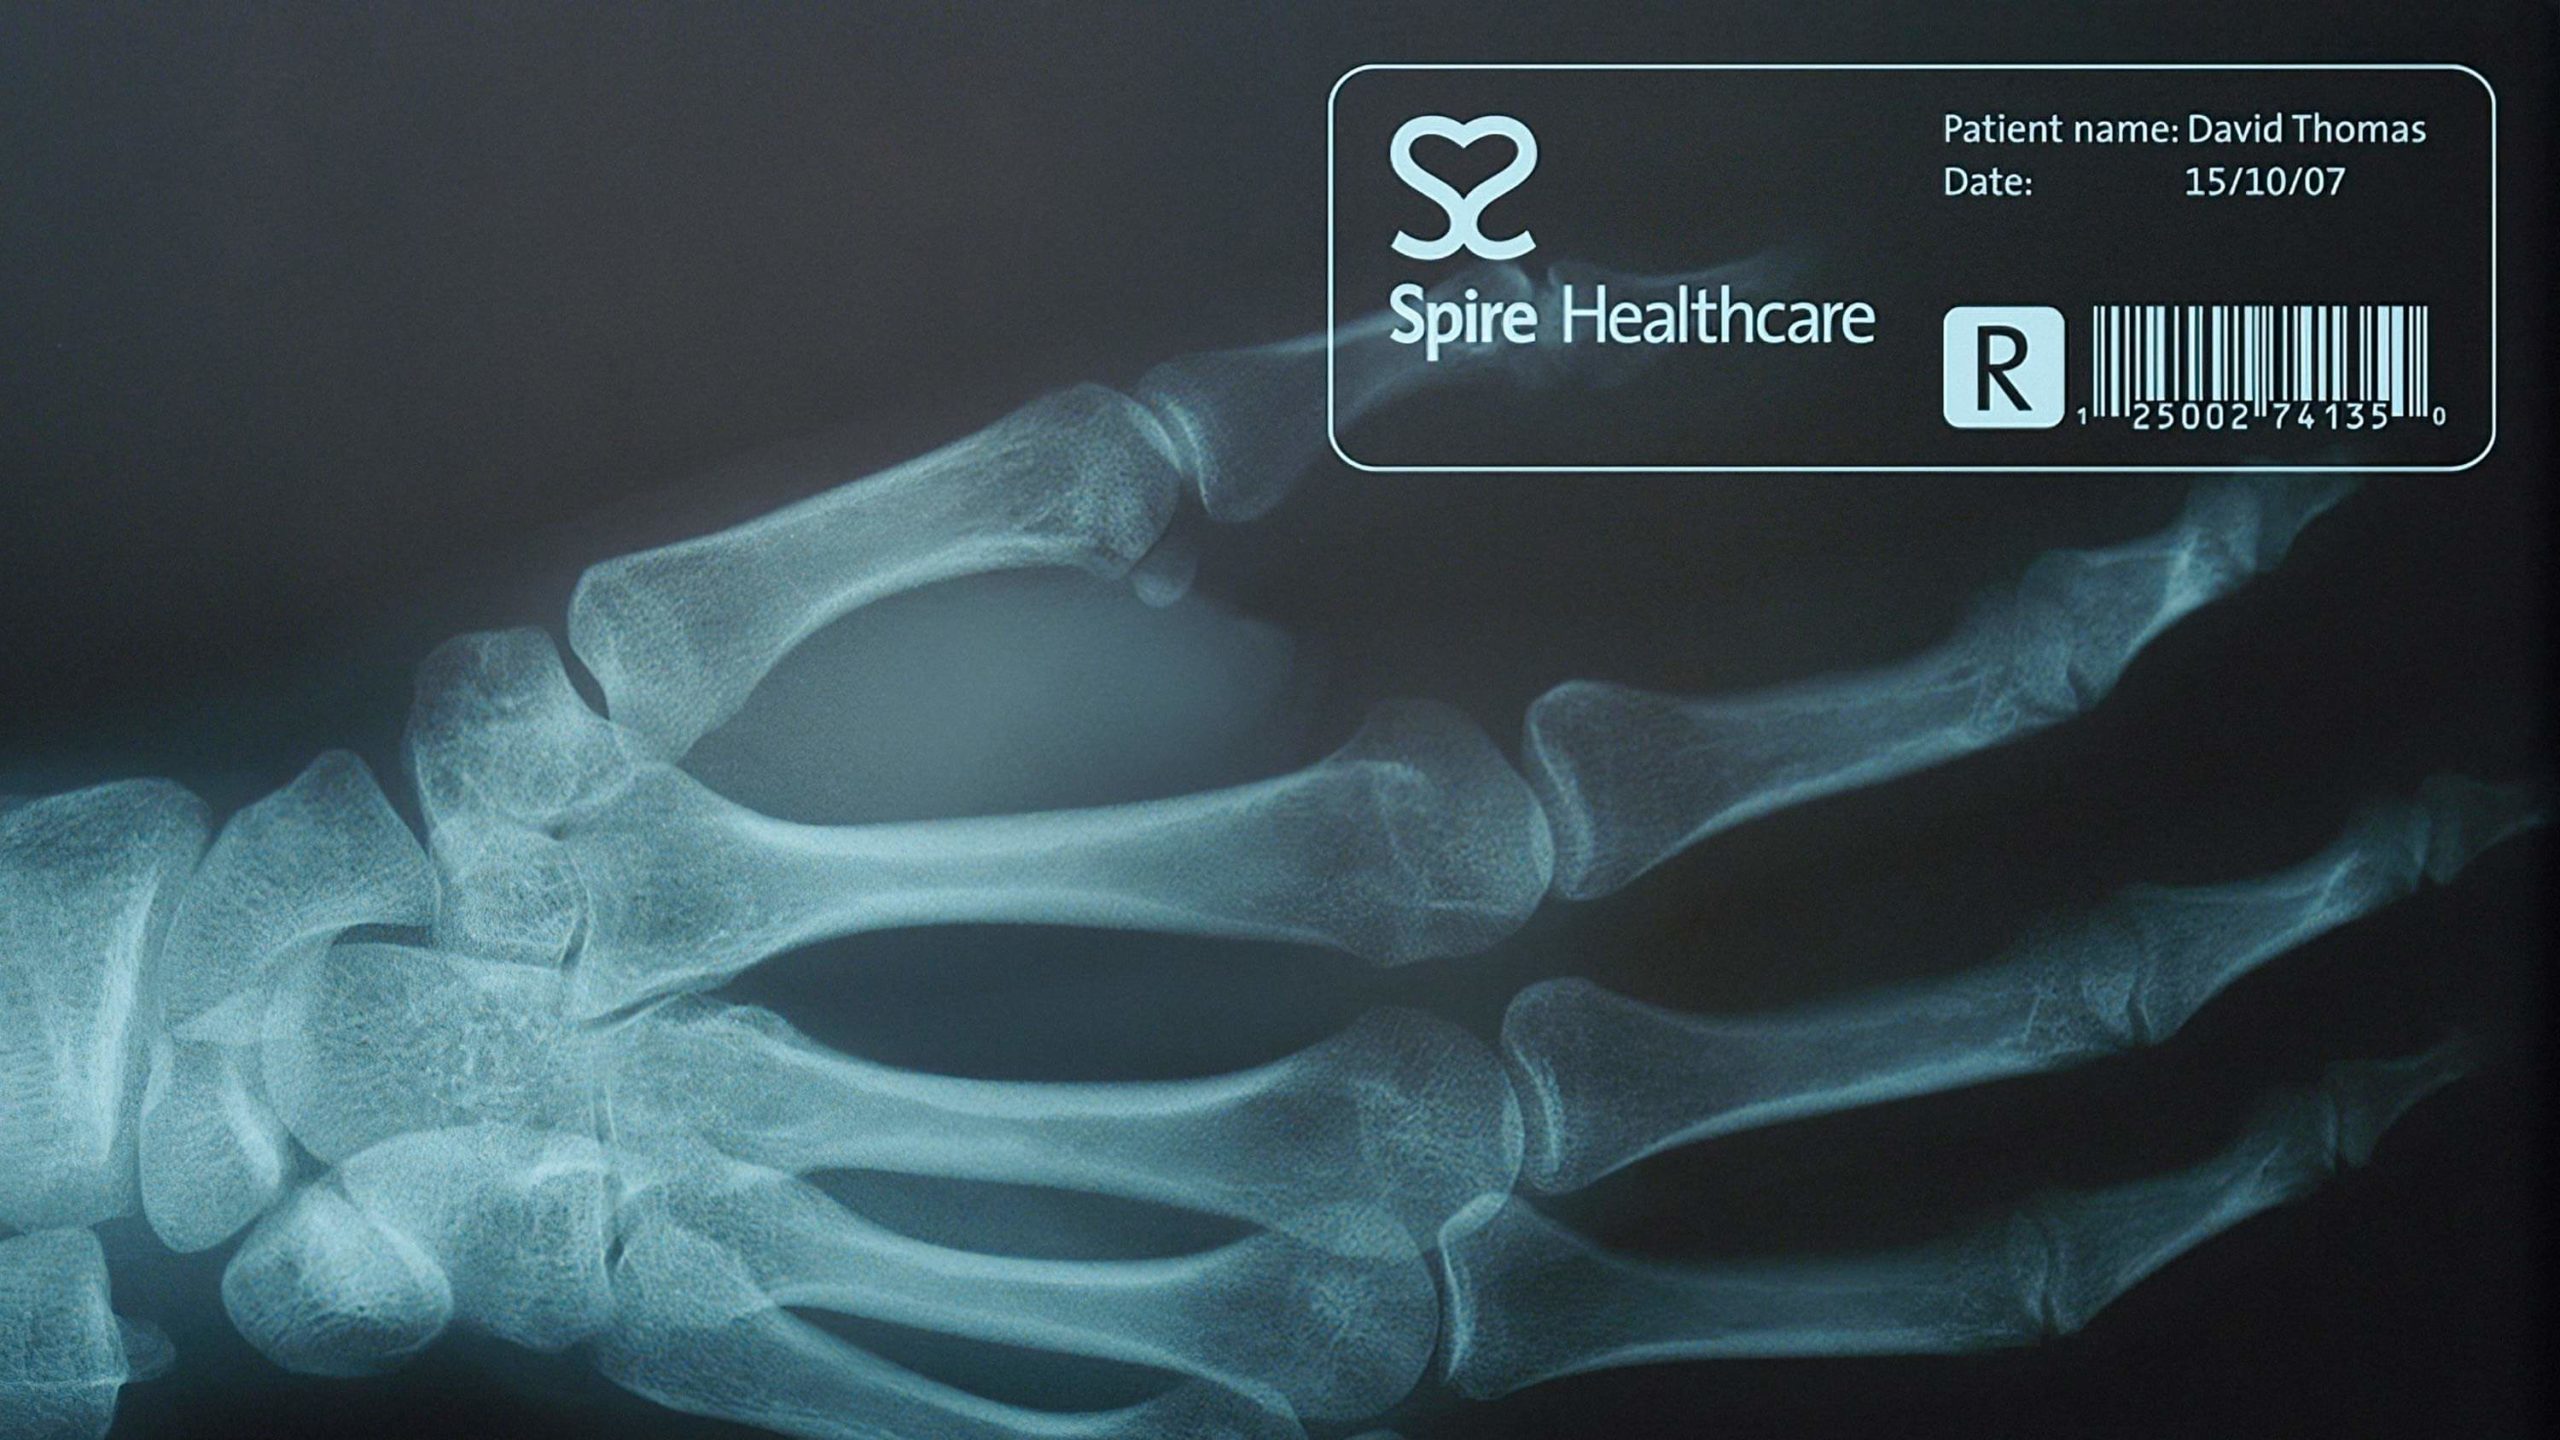 Spire Healthcare branded applications